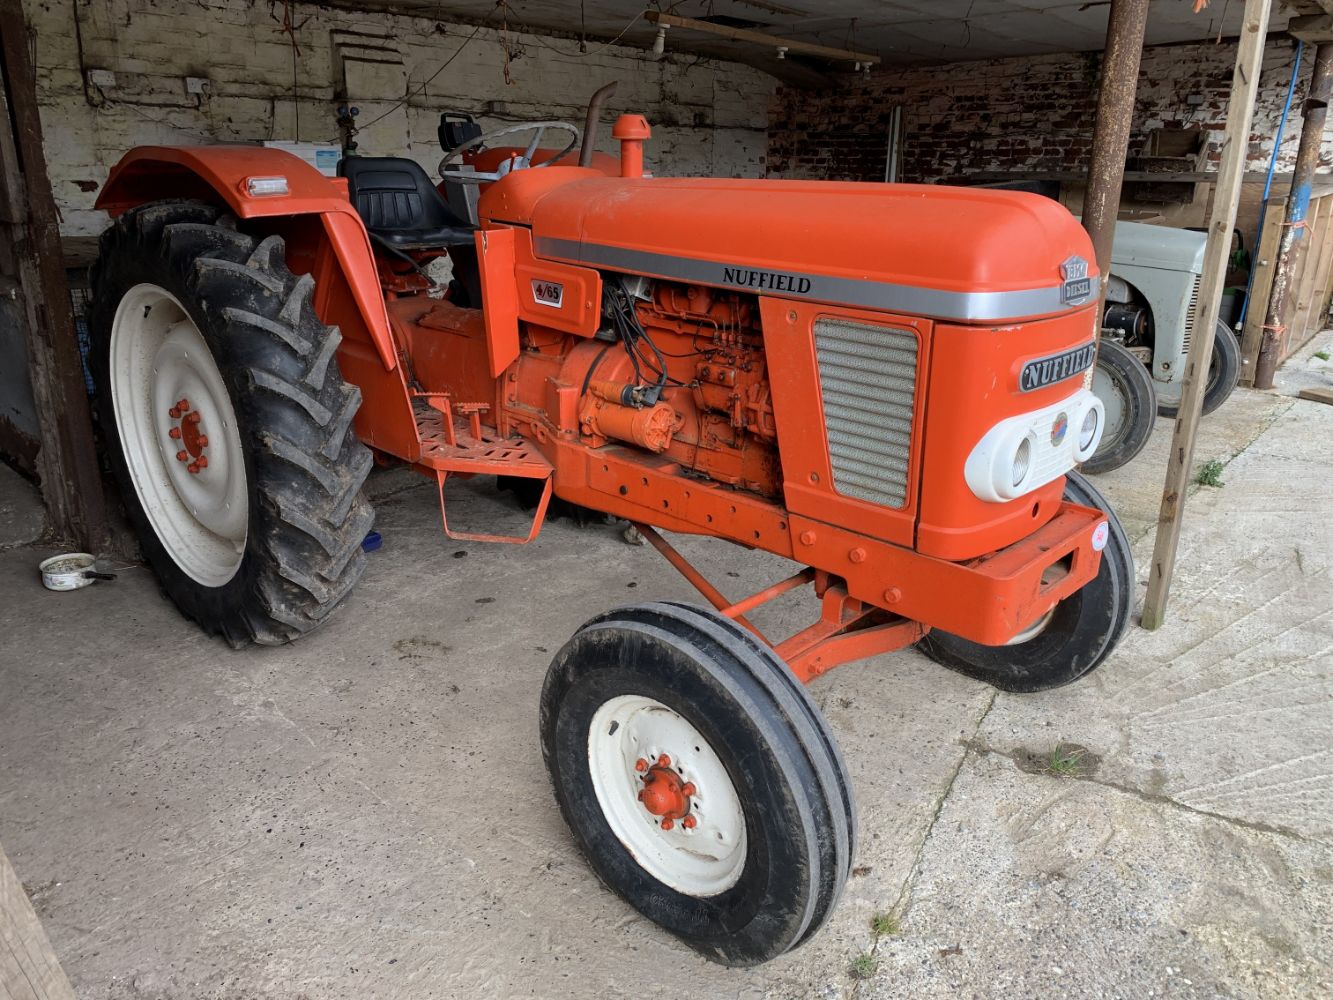 TOWRY & DAISY FARMS, ALDBROUGH, HULL - Auction Sale of 2 Collections inc. Vintage Tractors, Match Ploughs, Tools, Furniture, Collectables & Car